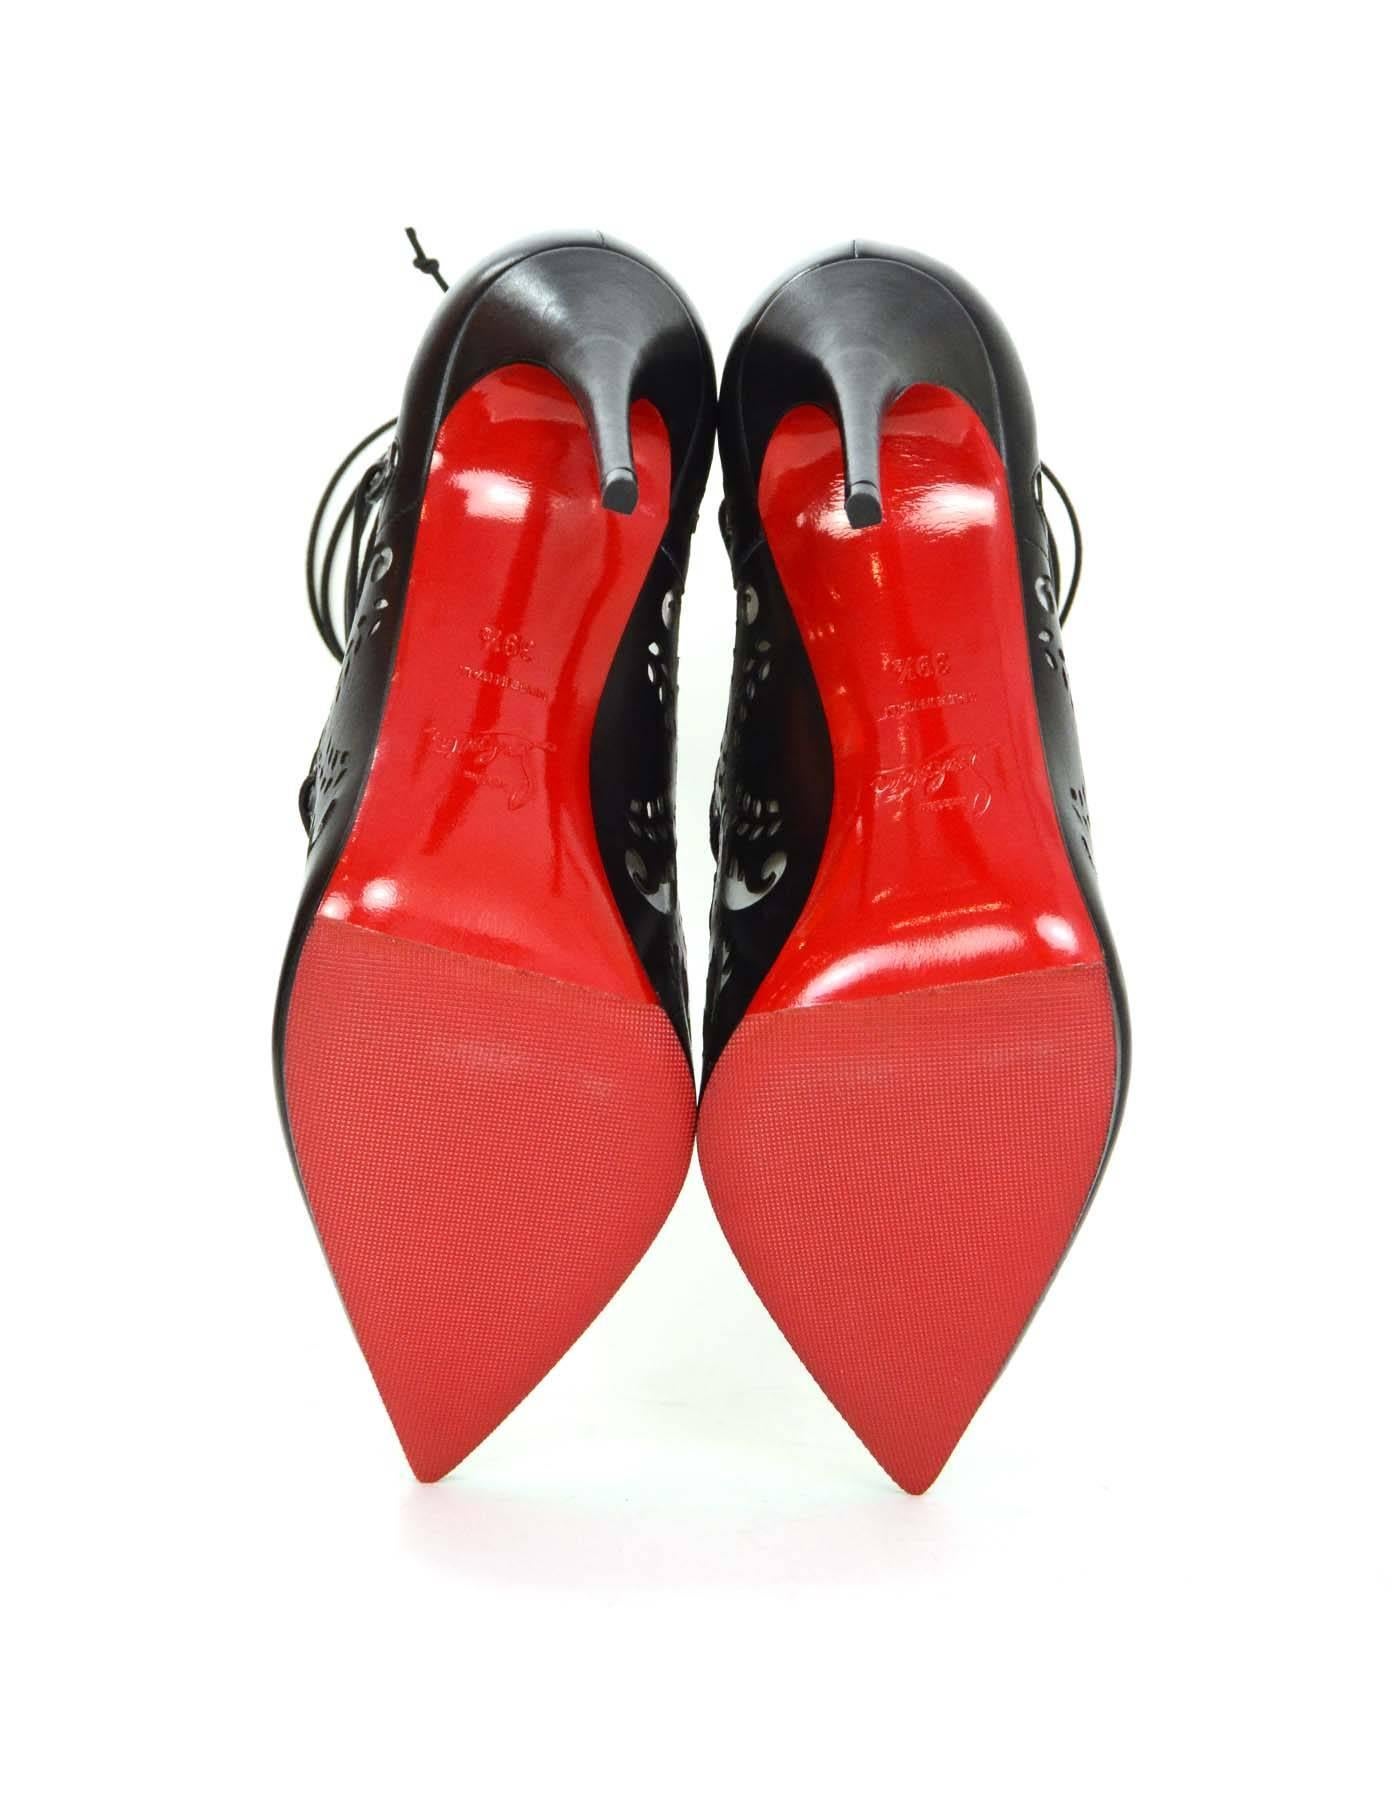 Christian Louboutin SOLT OUT Laser Cut Impera 100mm Lace Up Pumps sz 39.5 In Excellent Condition In New York, NY